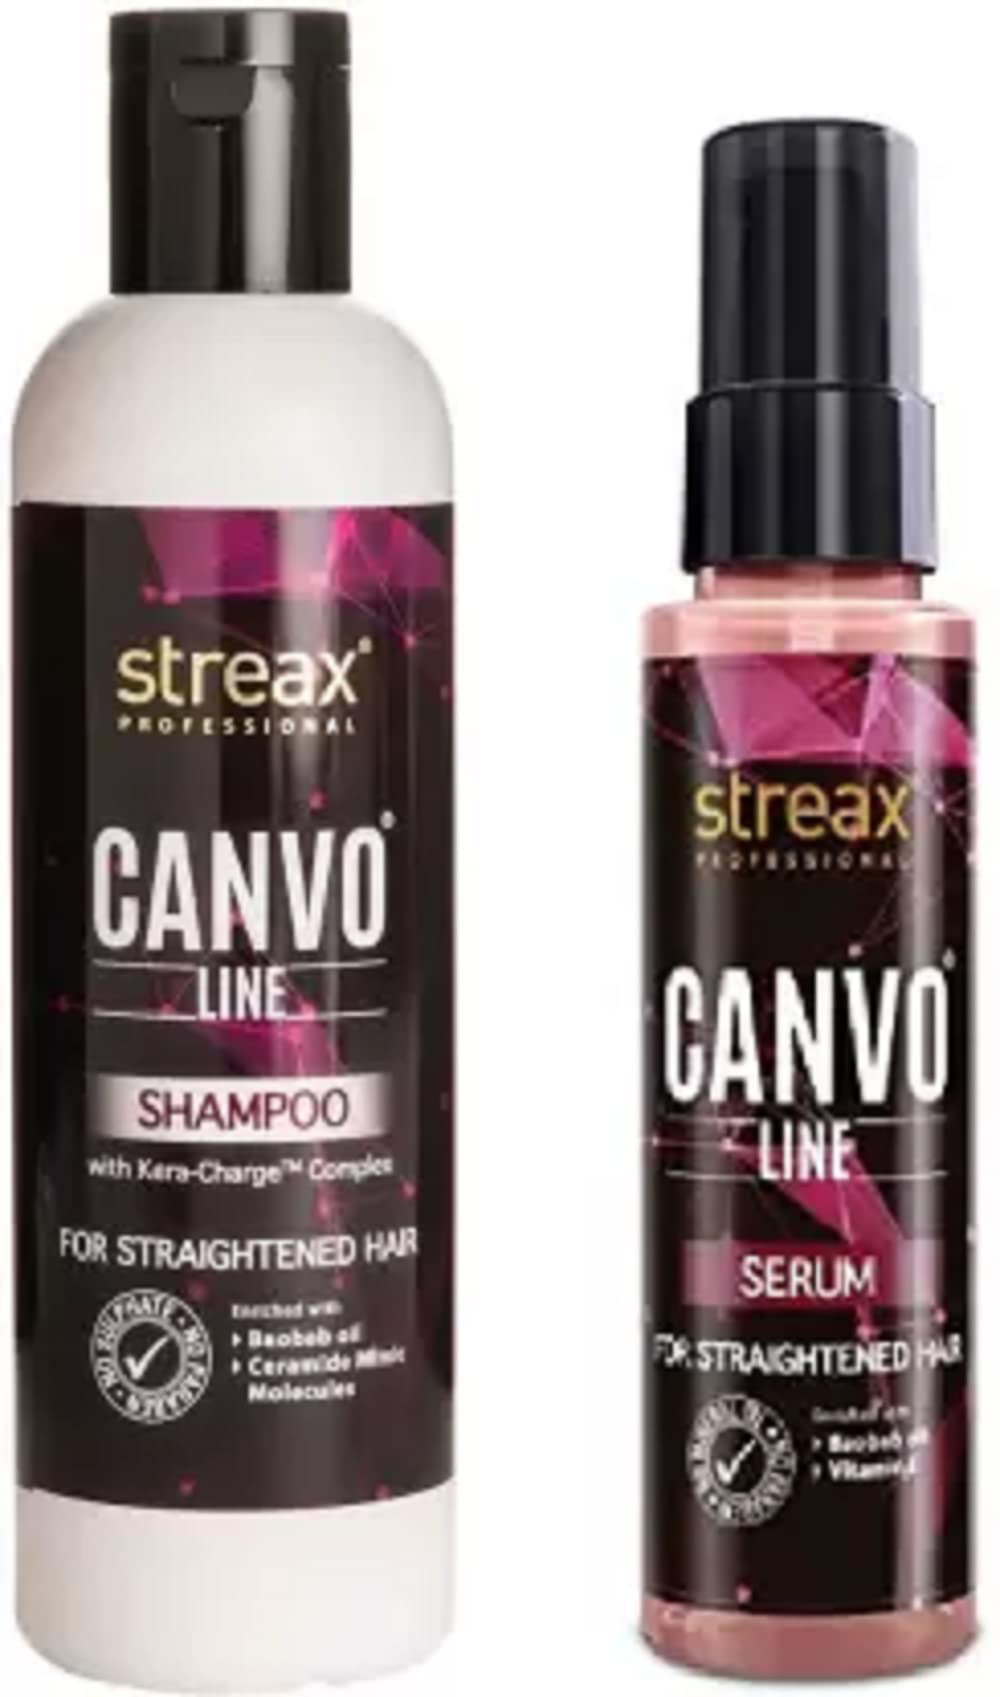 Streax Professional Canvo Line Shampoo (250Ml) With Serum (100Ml) (2 Items  In The Set) 